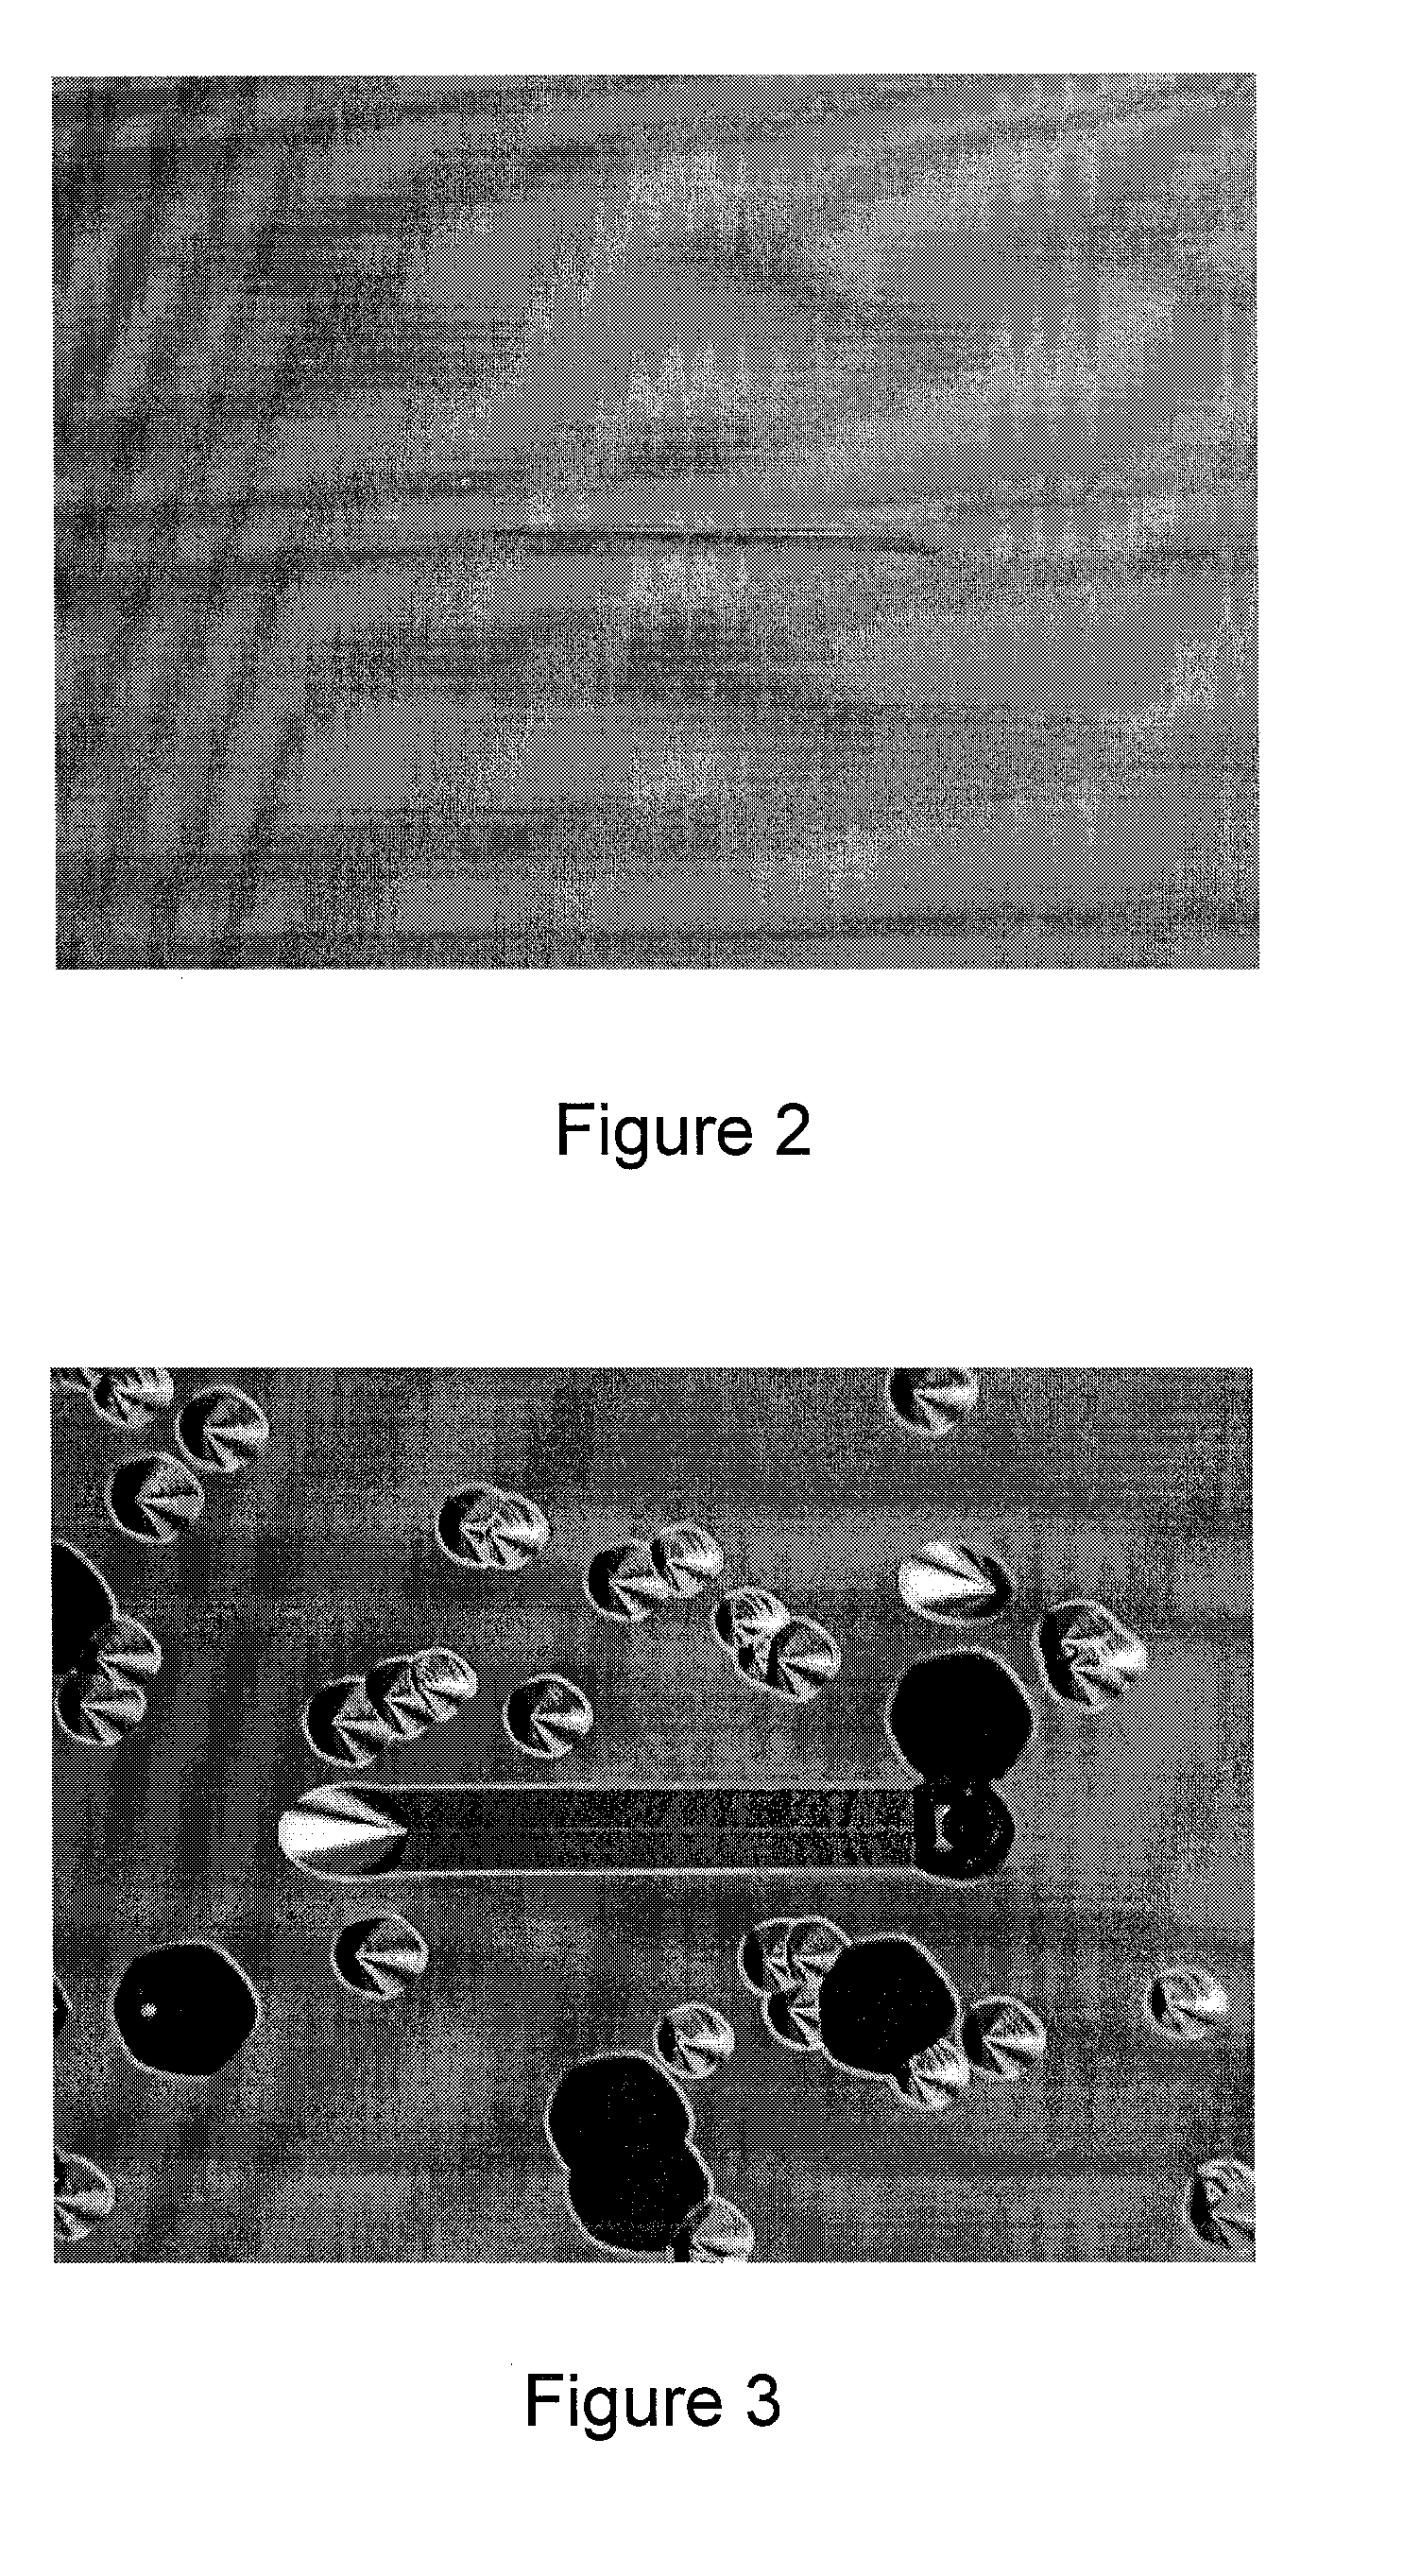 Method To Reduce Stacking Fault Nucleation Sites And Reduce Forward Voltage Drift In Bipolar Devices